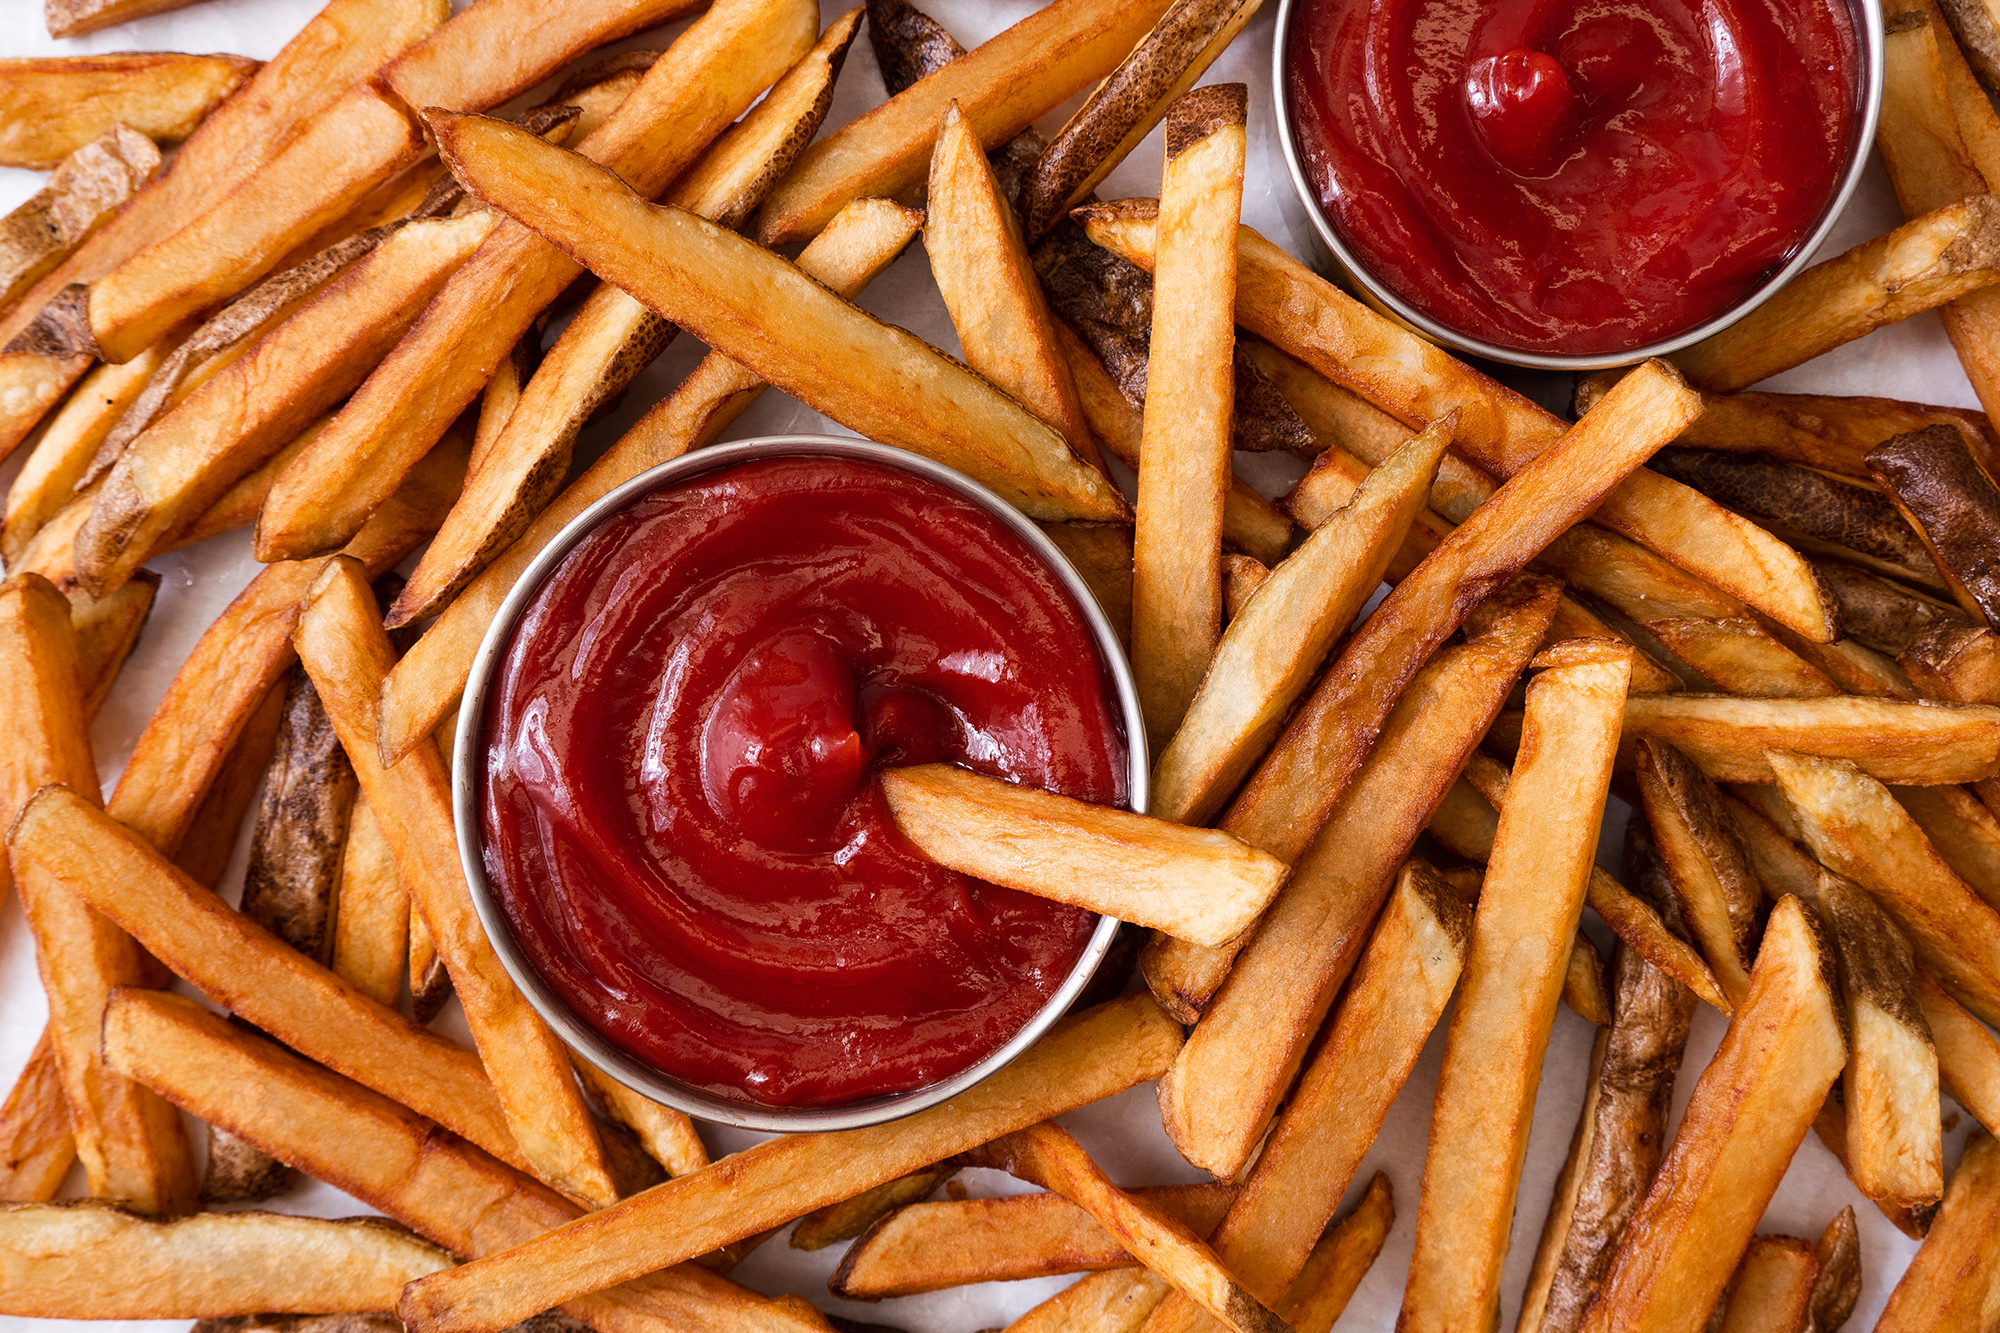 Woodstock Ketchup and Fries